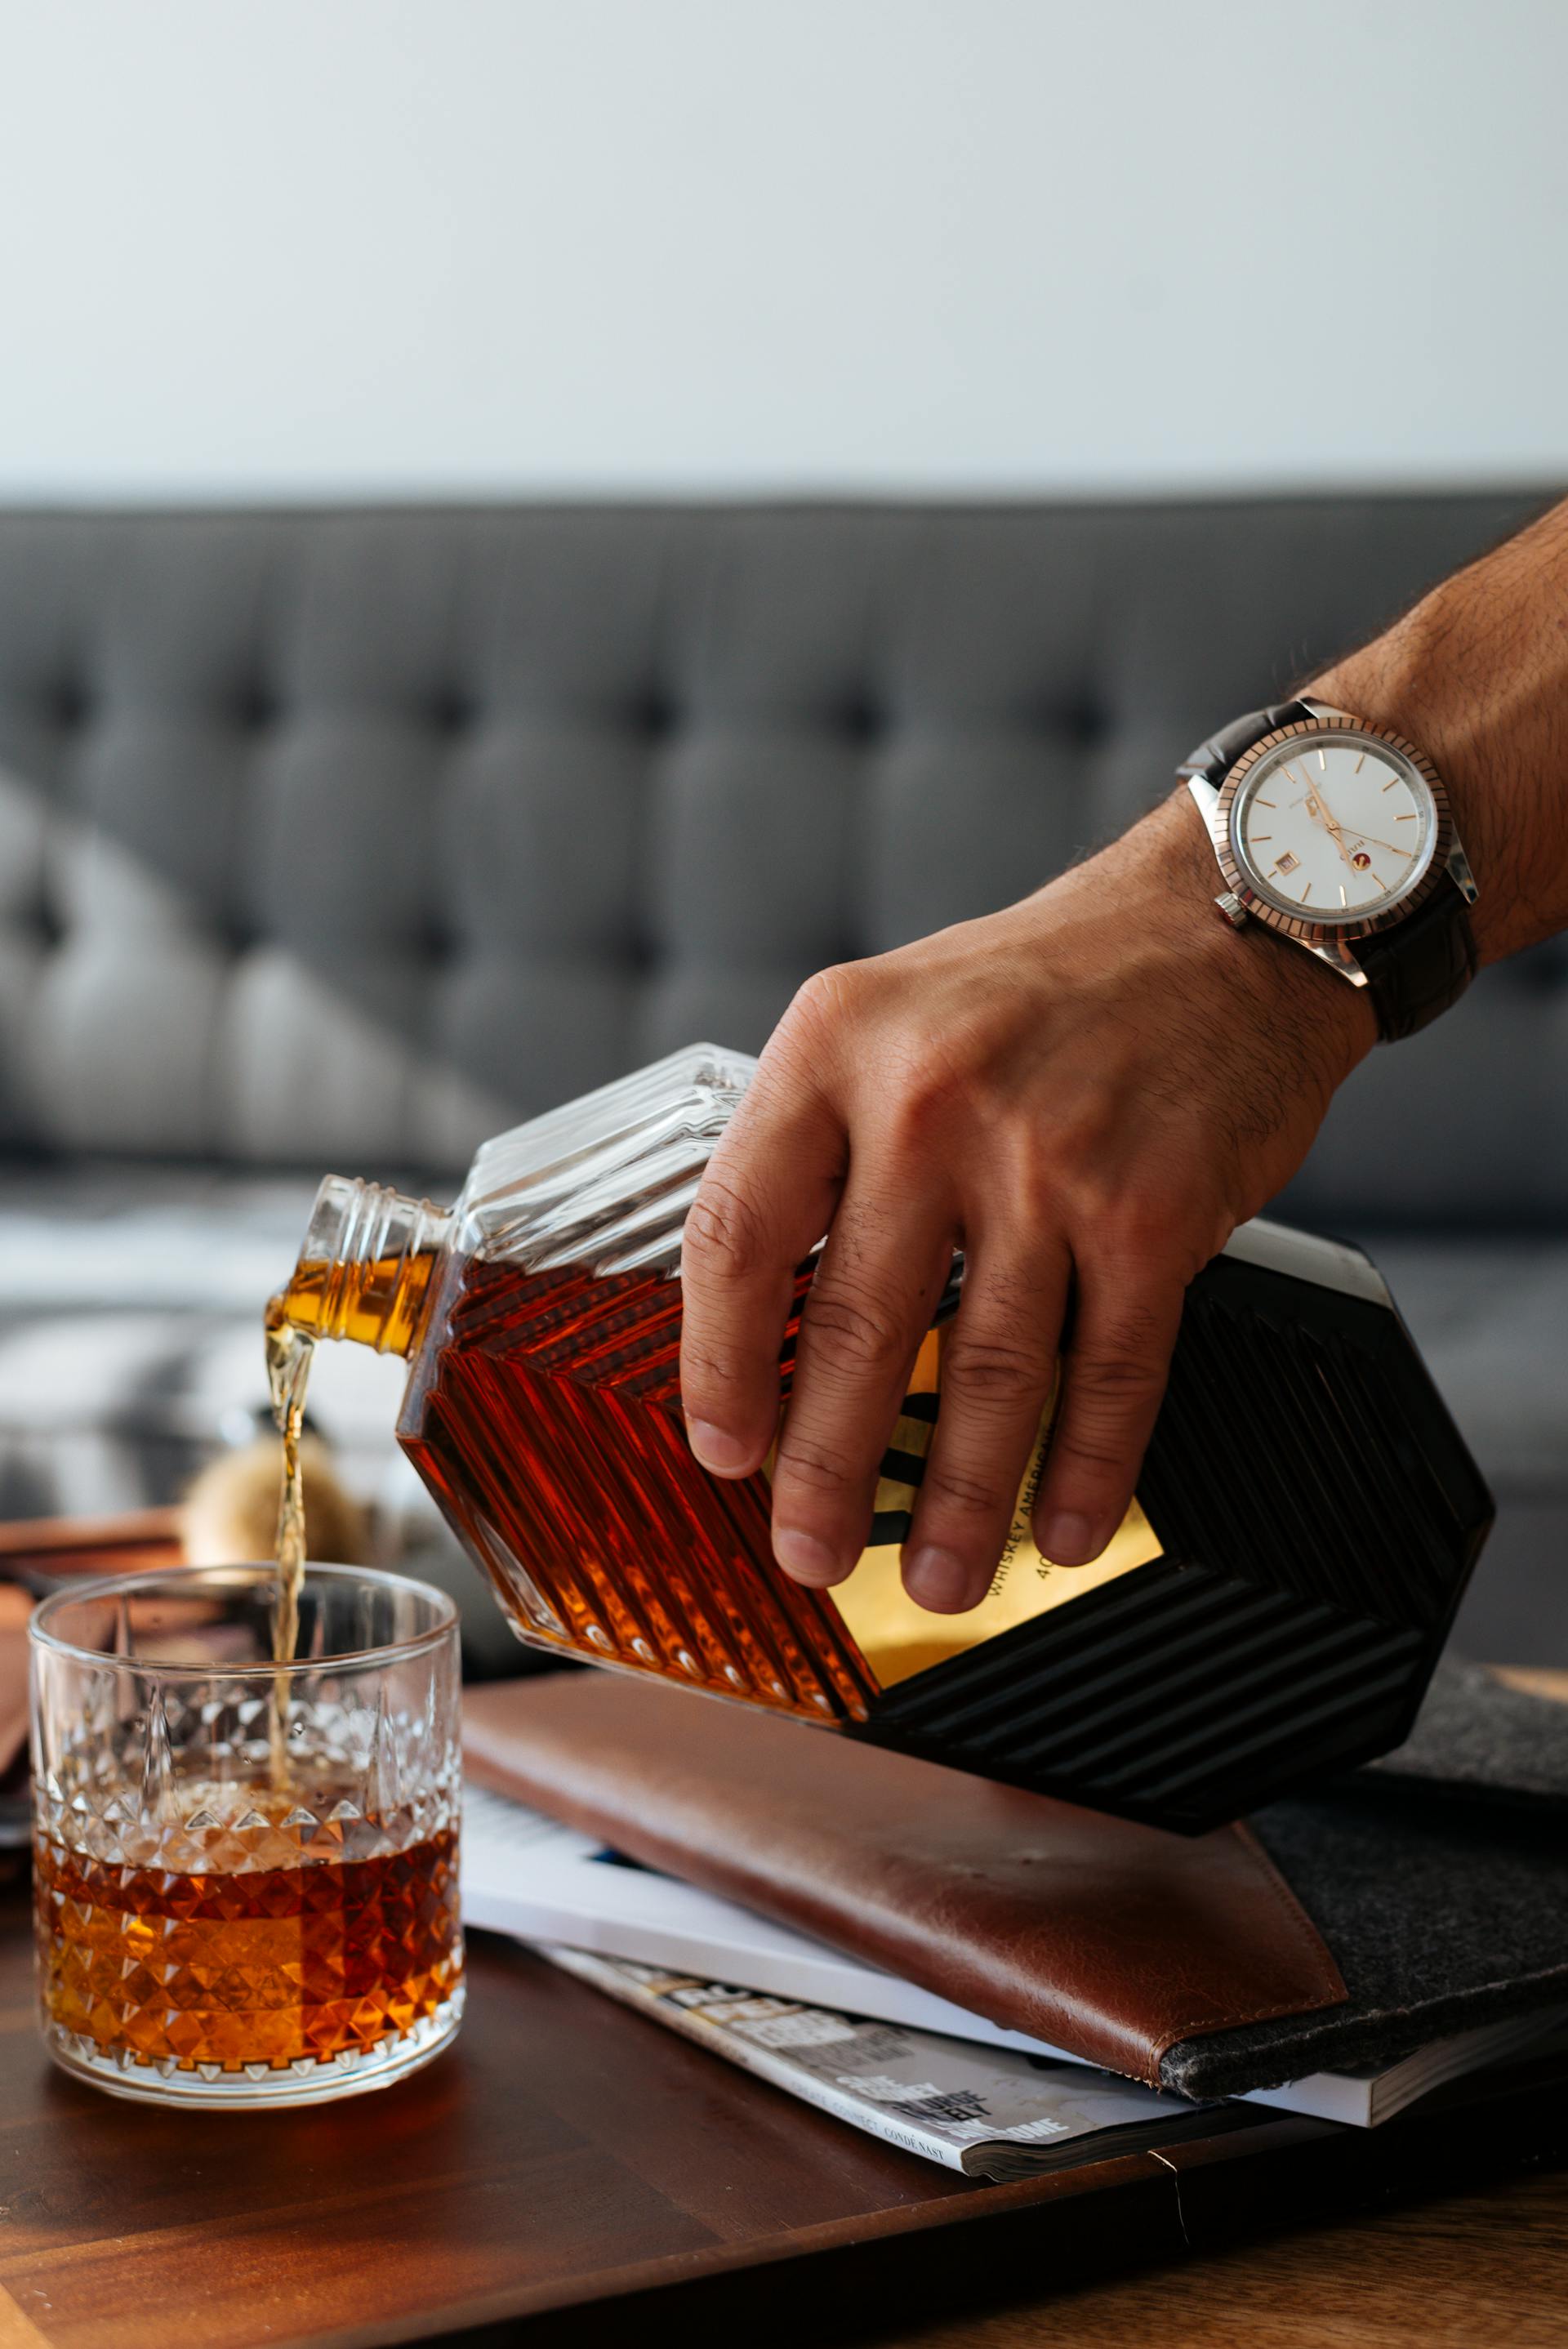 A man pouring a drink | Source: Pexels